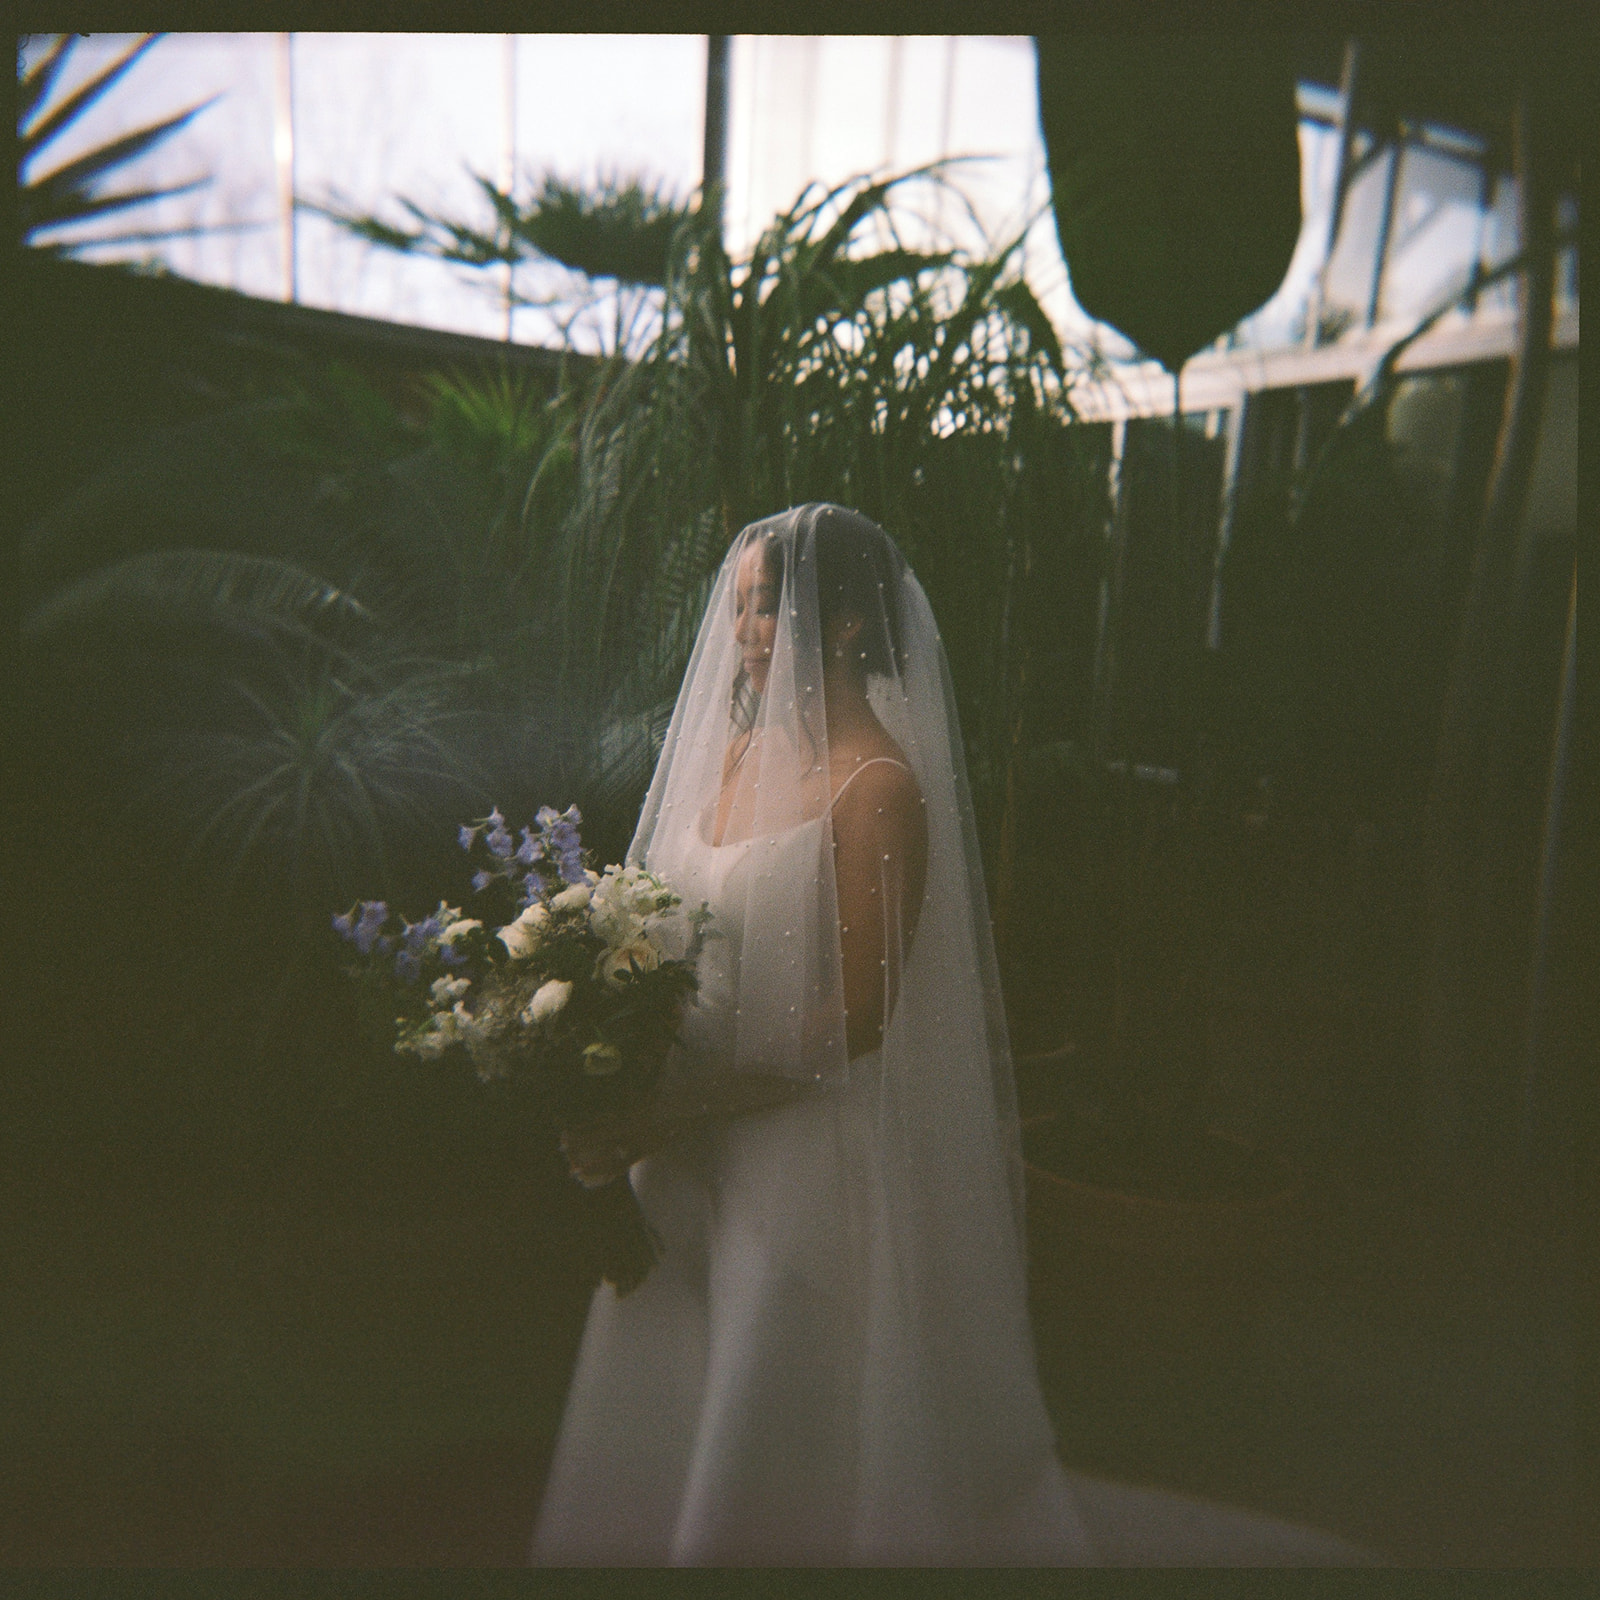 kodak portra 400 medium format film photo of the bride in the greenhouse with her veil over her head